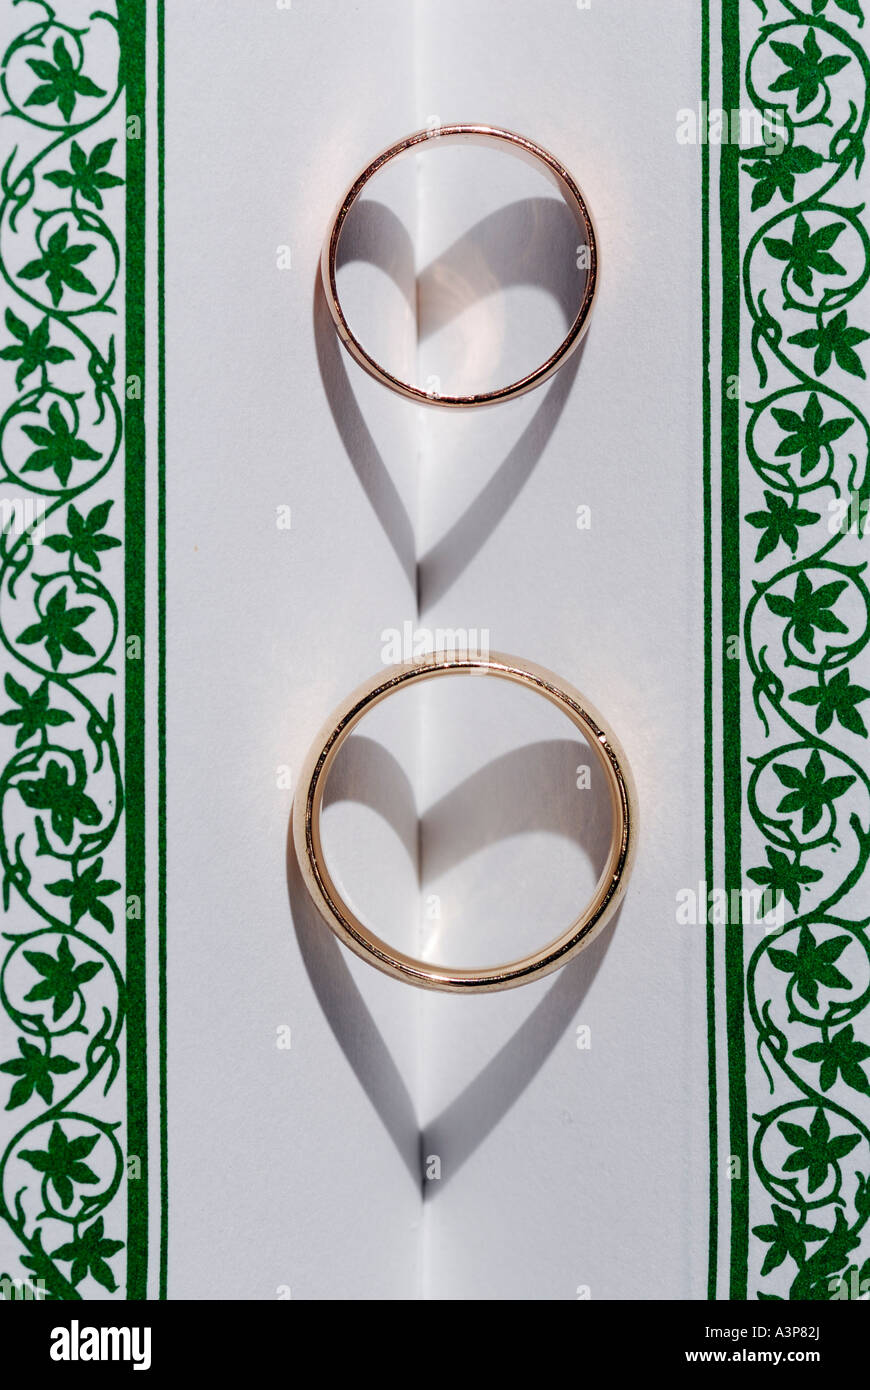 Two rings on a book spine with heart shadows for love Stock Photo